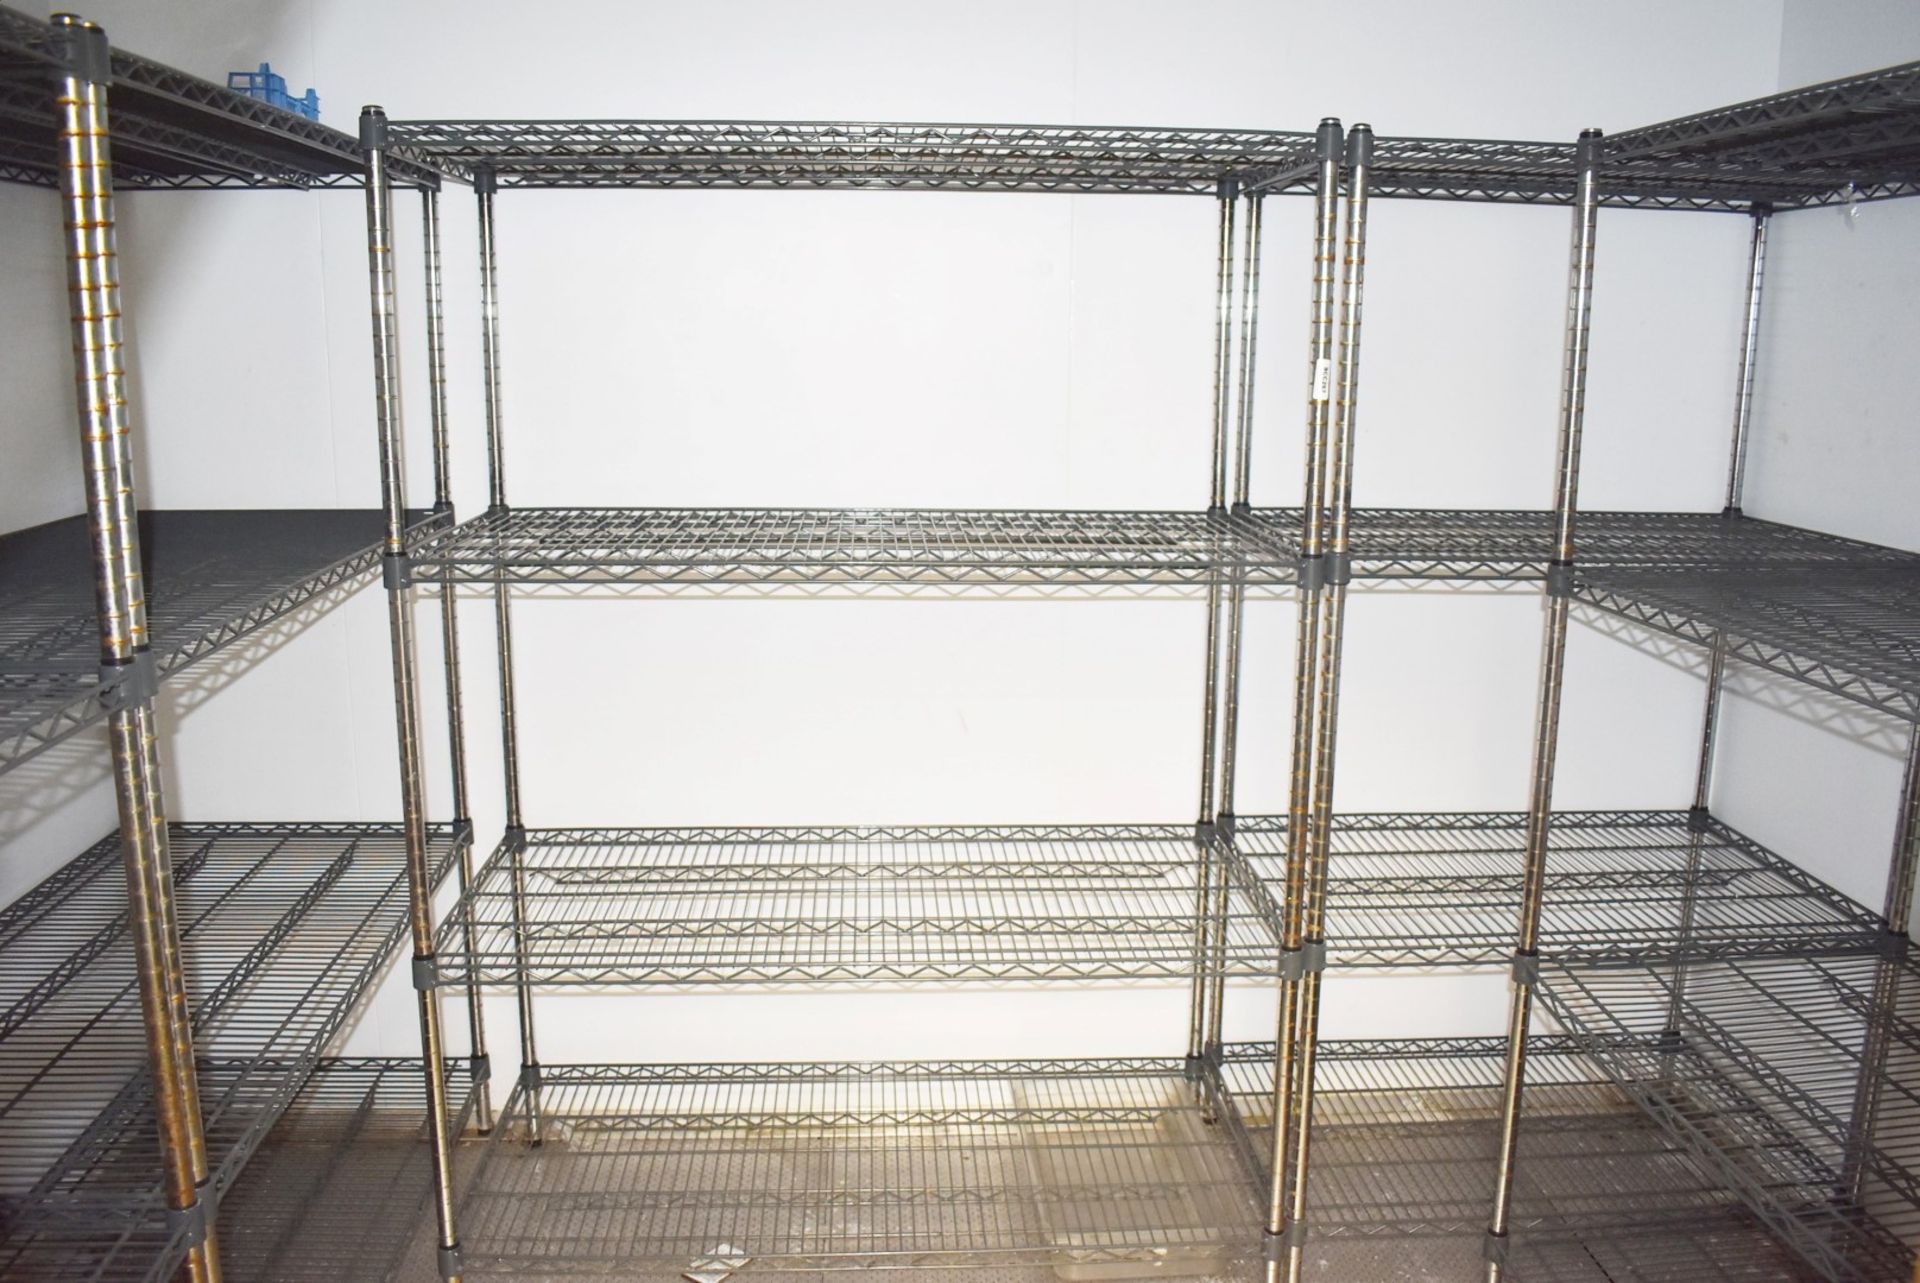 5 x Assorted Cold Room Wire Storage Shelf Units With Coated Shelves - H168 x W90-124 x D60 cms - Image 8 of 9